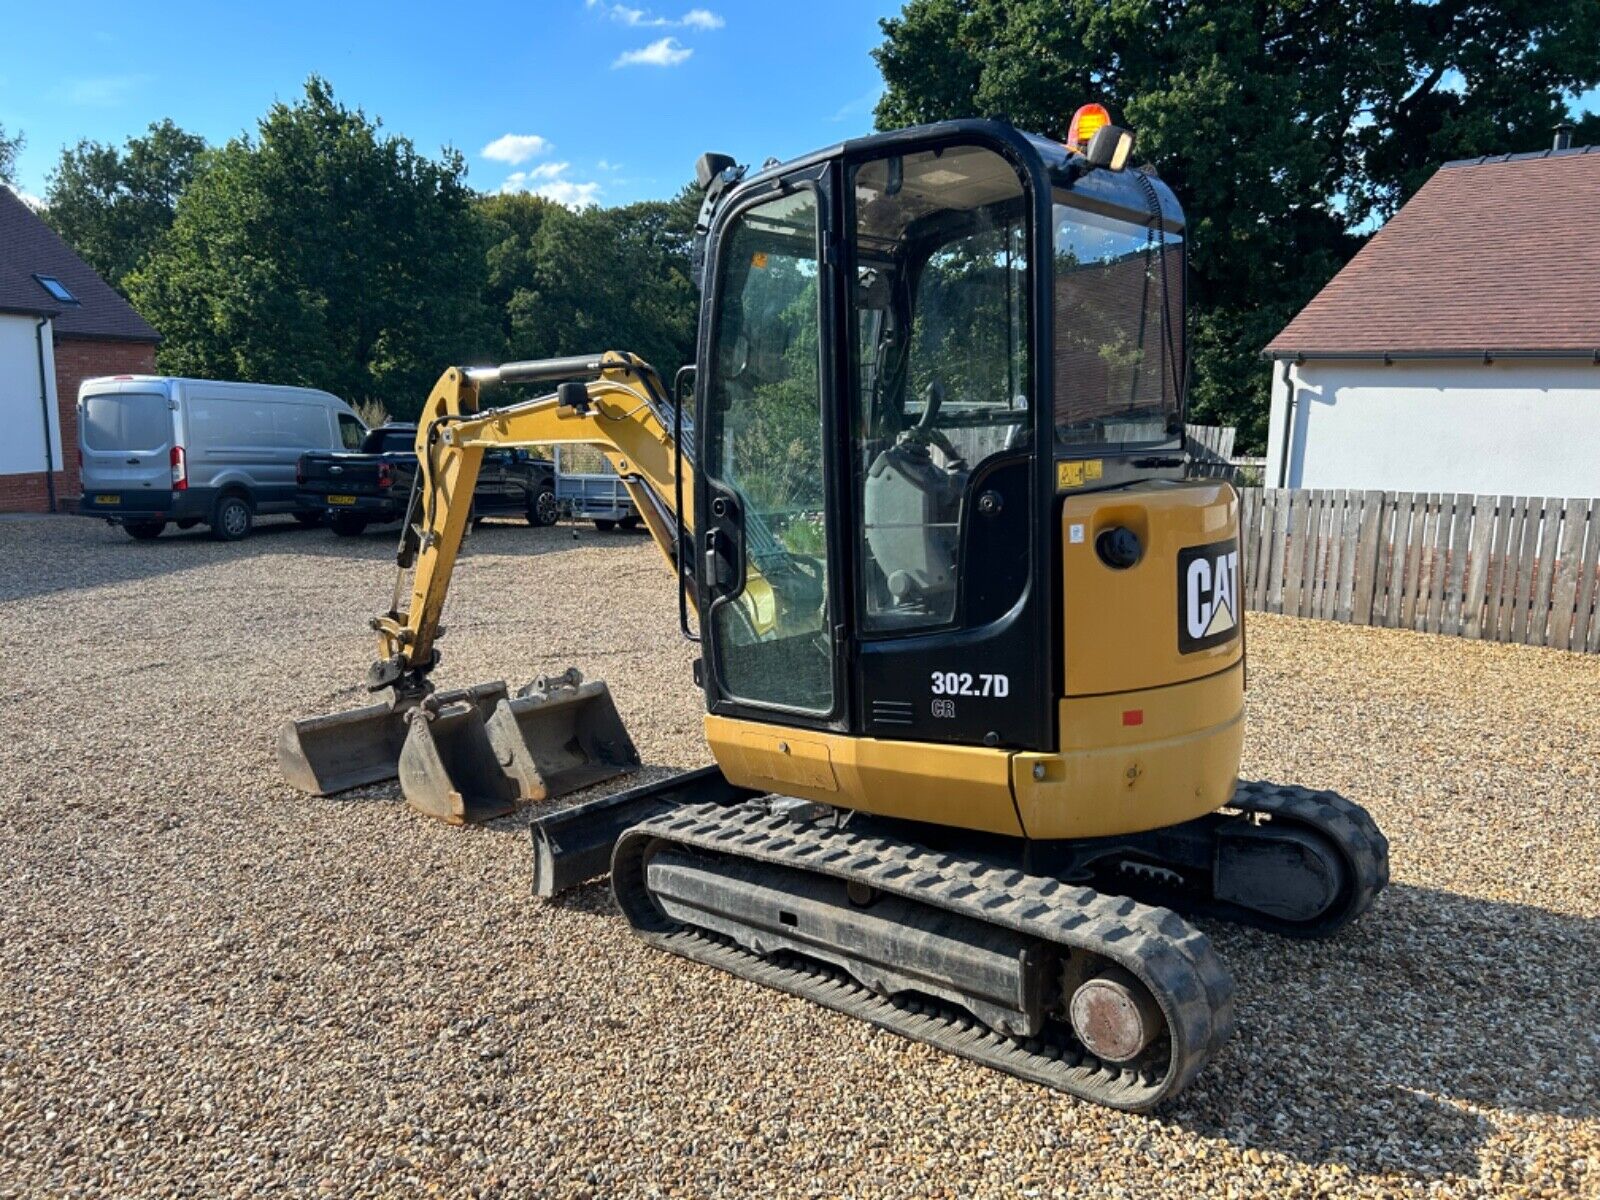 Bid on DEPENDABLE WORKHORSE: CAT 302.7 3-TON DIGGER FOR SALE- Buy &amp; Sell on Auction with EAMA Group